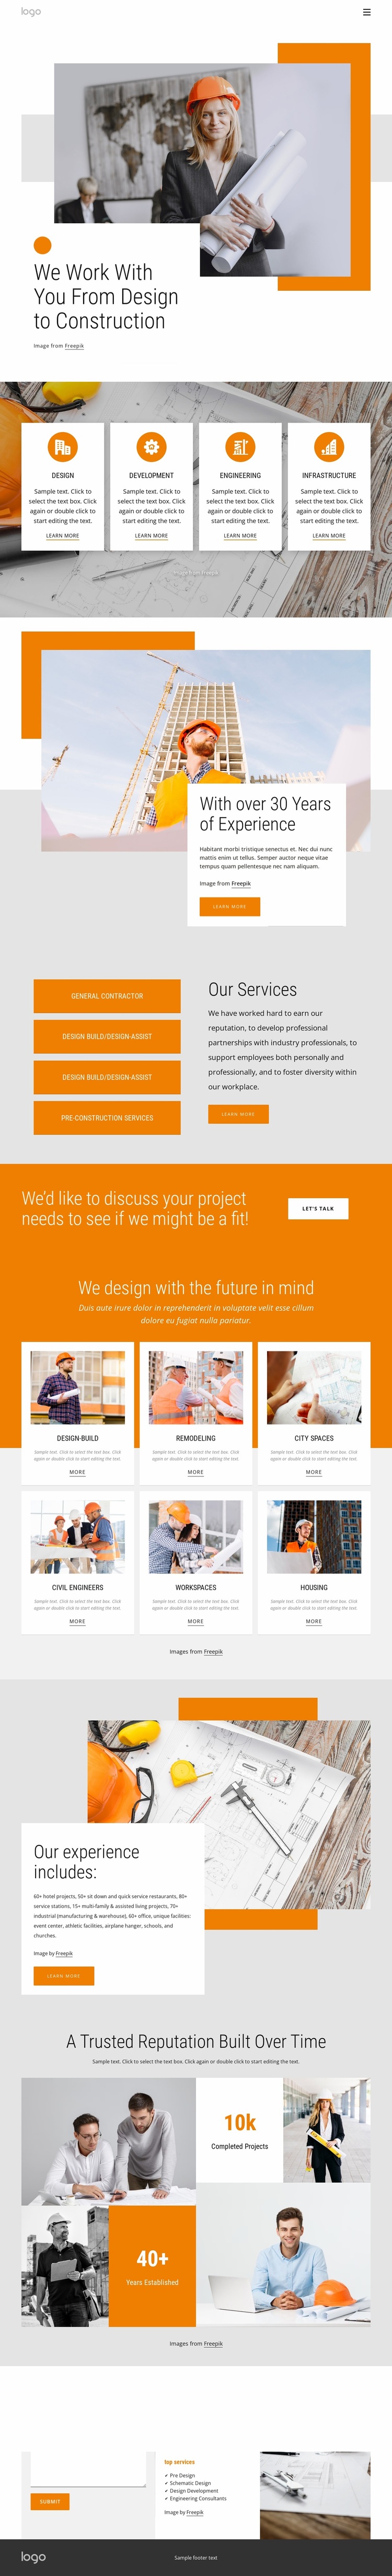 From design to construction Website Design